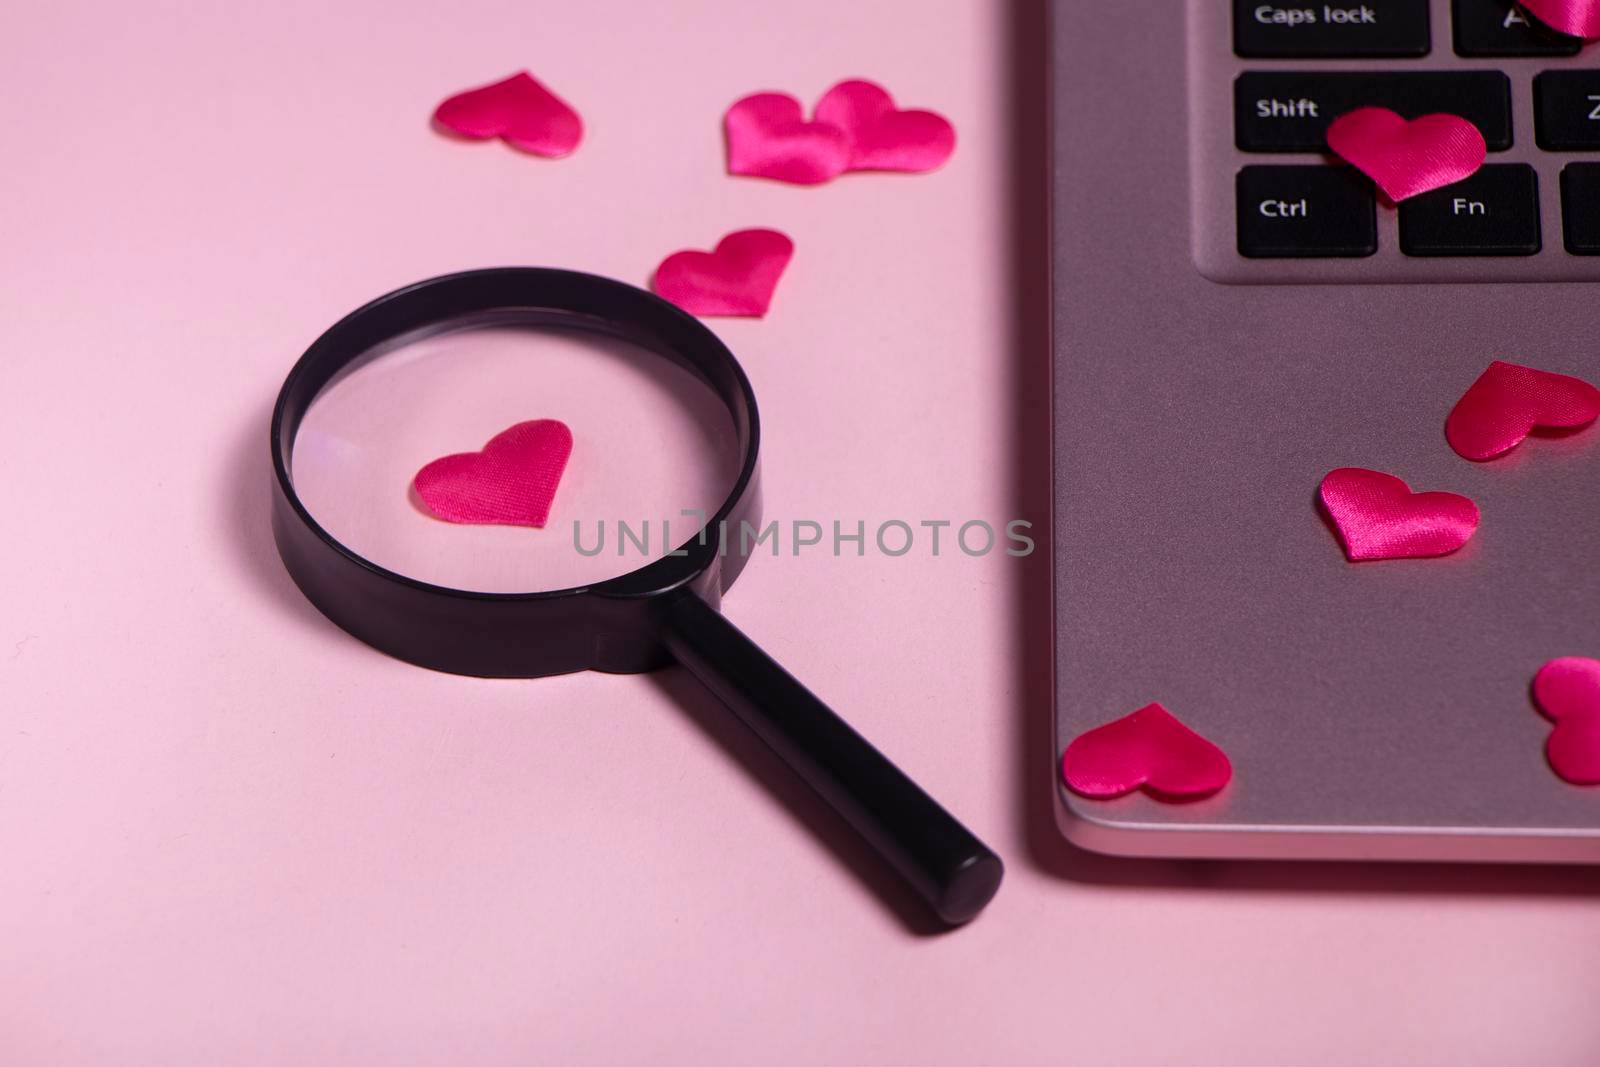 Red heart on the computer keyboard, magnifying glass with handle. Concept of searching for love on the internet, internet dating site, copyspace, place for text. Pink laptop on pink background.